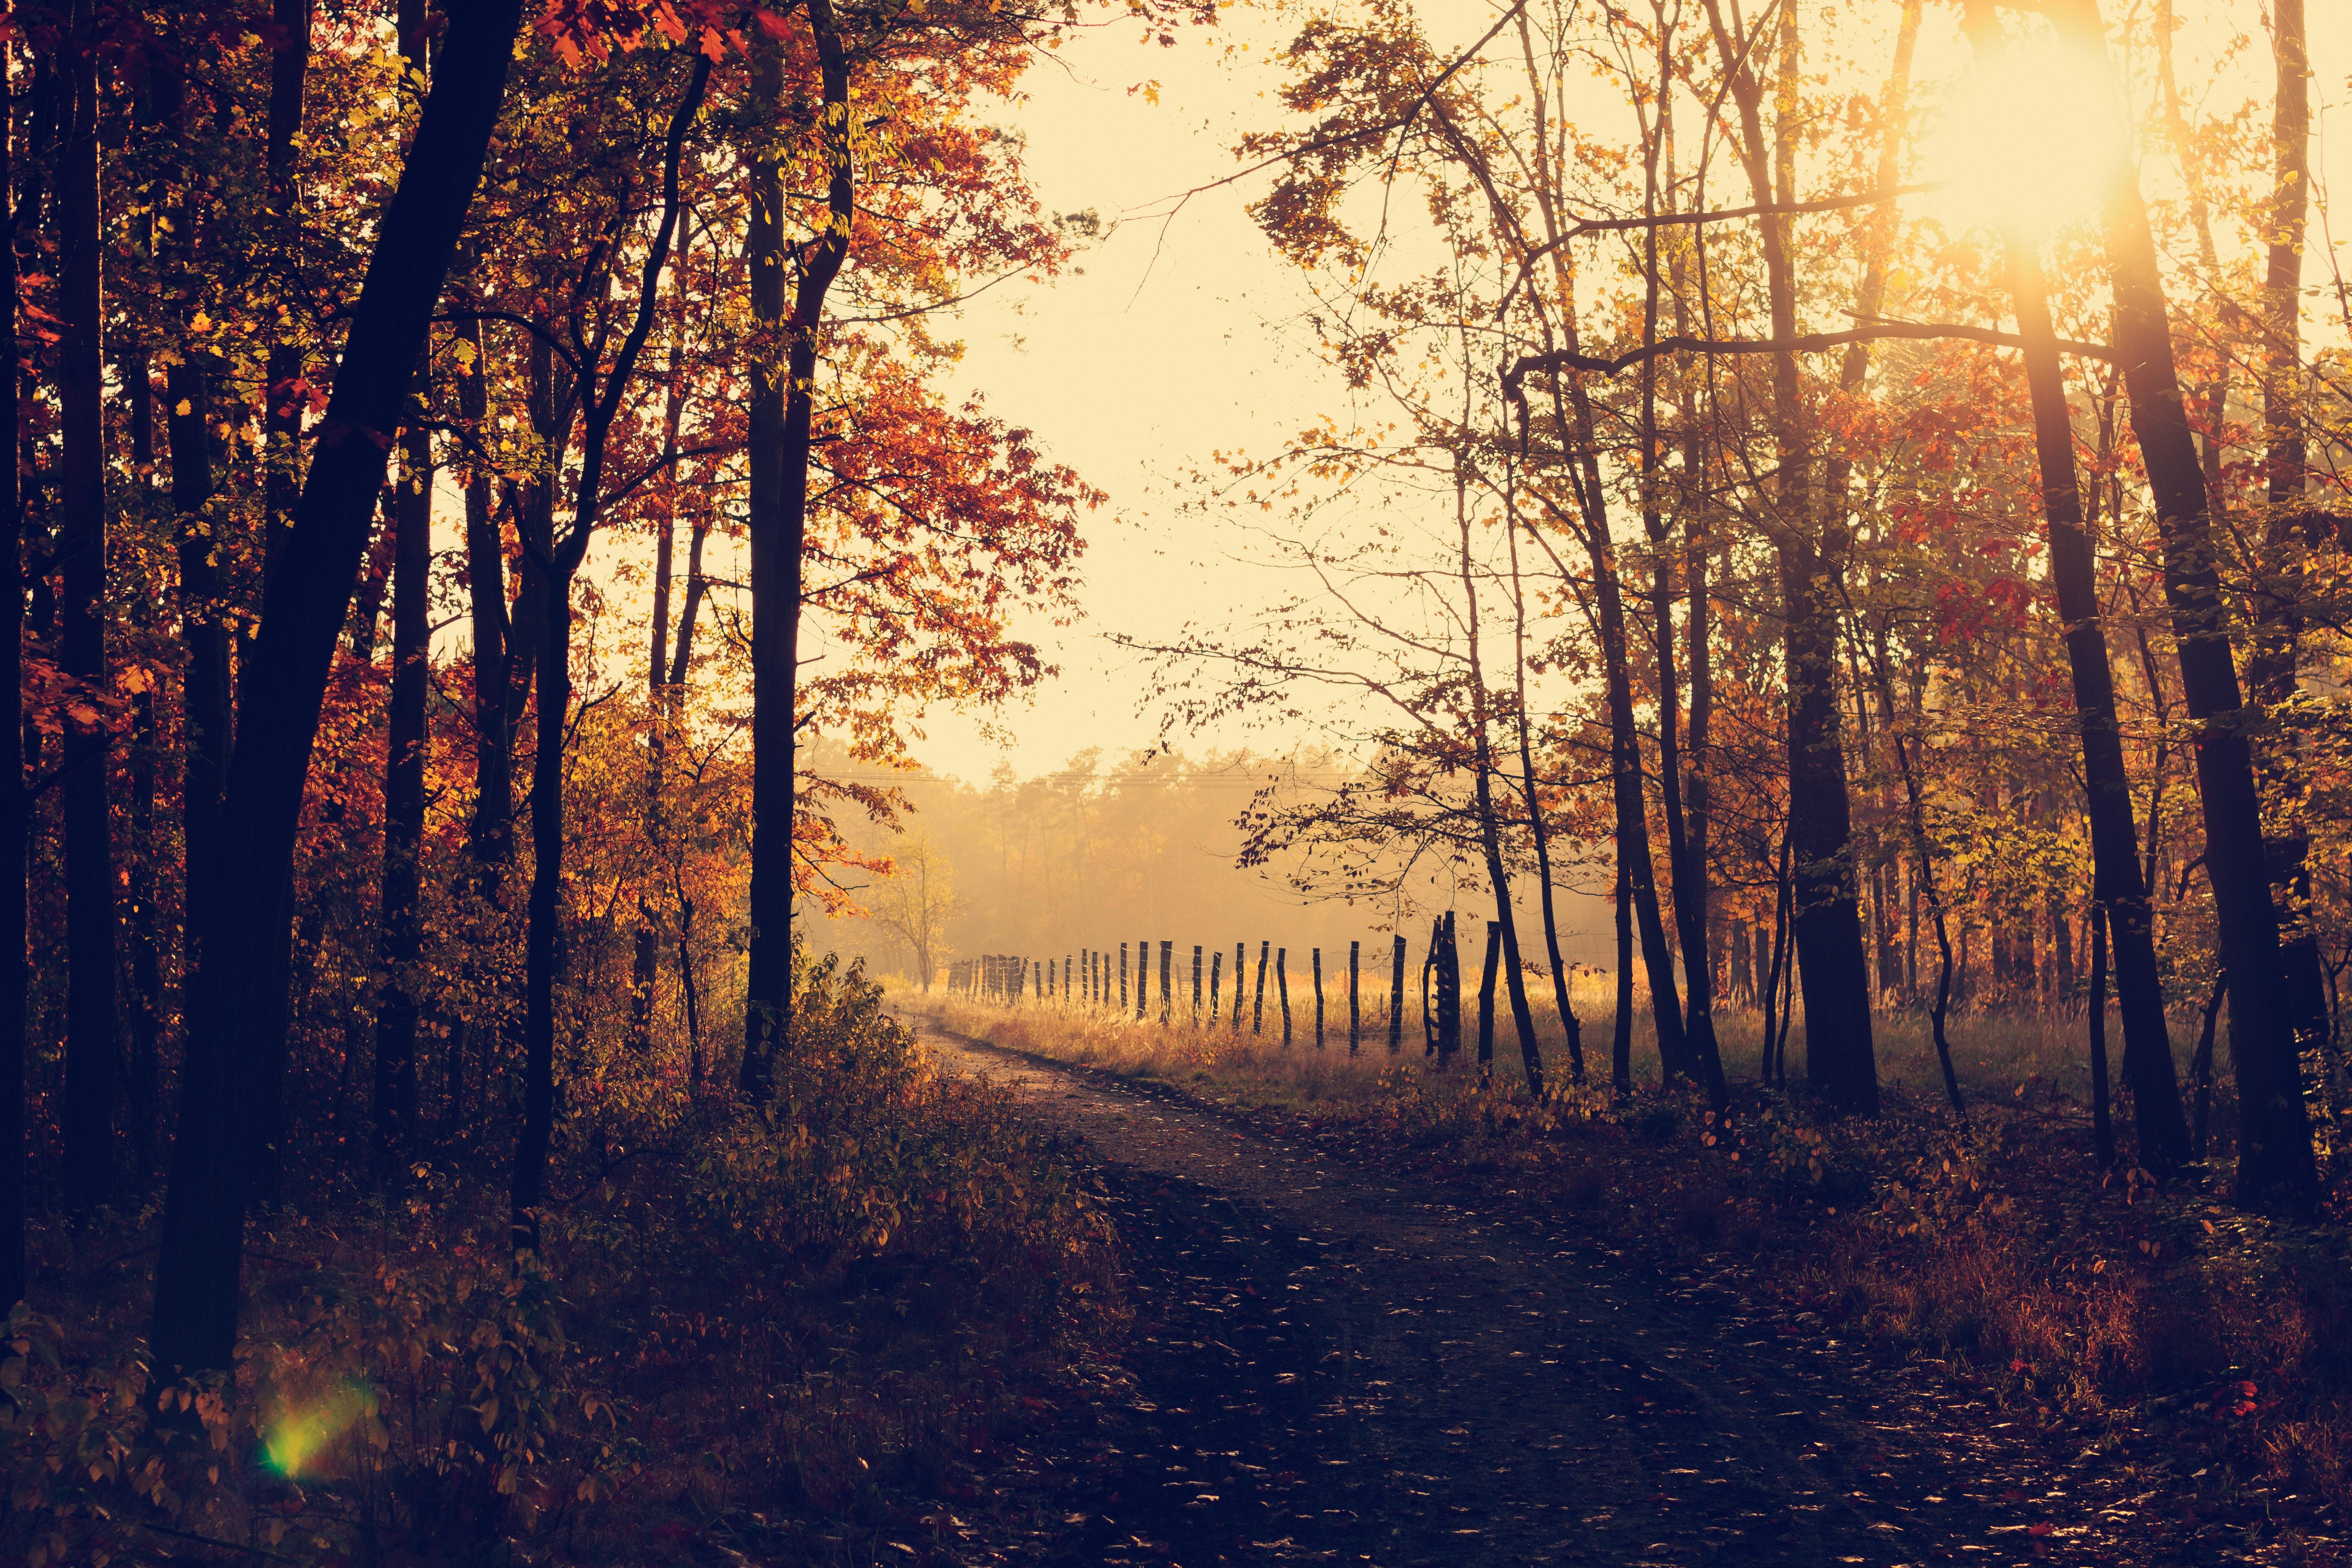 5184x3456 #forest path, #autumnal, #sun, #wallpaper, #autumnal colours, #forest light, #tree, #countryside, #fall wallpaper, #fog, #sunset, #forest tree, #fall background, #seasonal, #forest, #Free image, #rural, # autumn, #forest floor